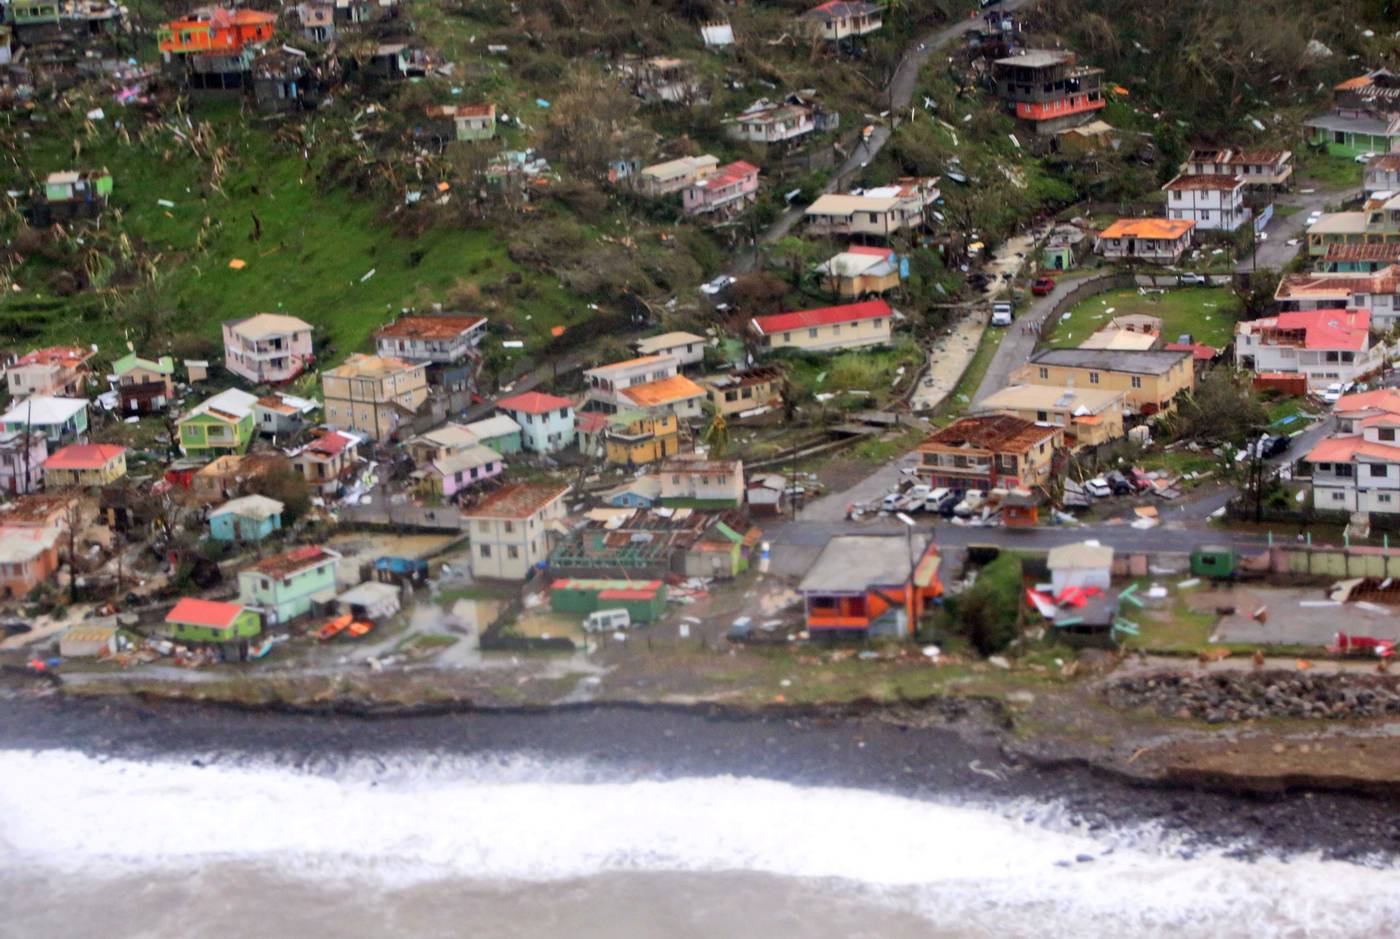 Hurricane-hit Dominica hurries to prepare for next storm season picture